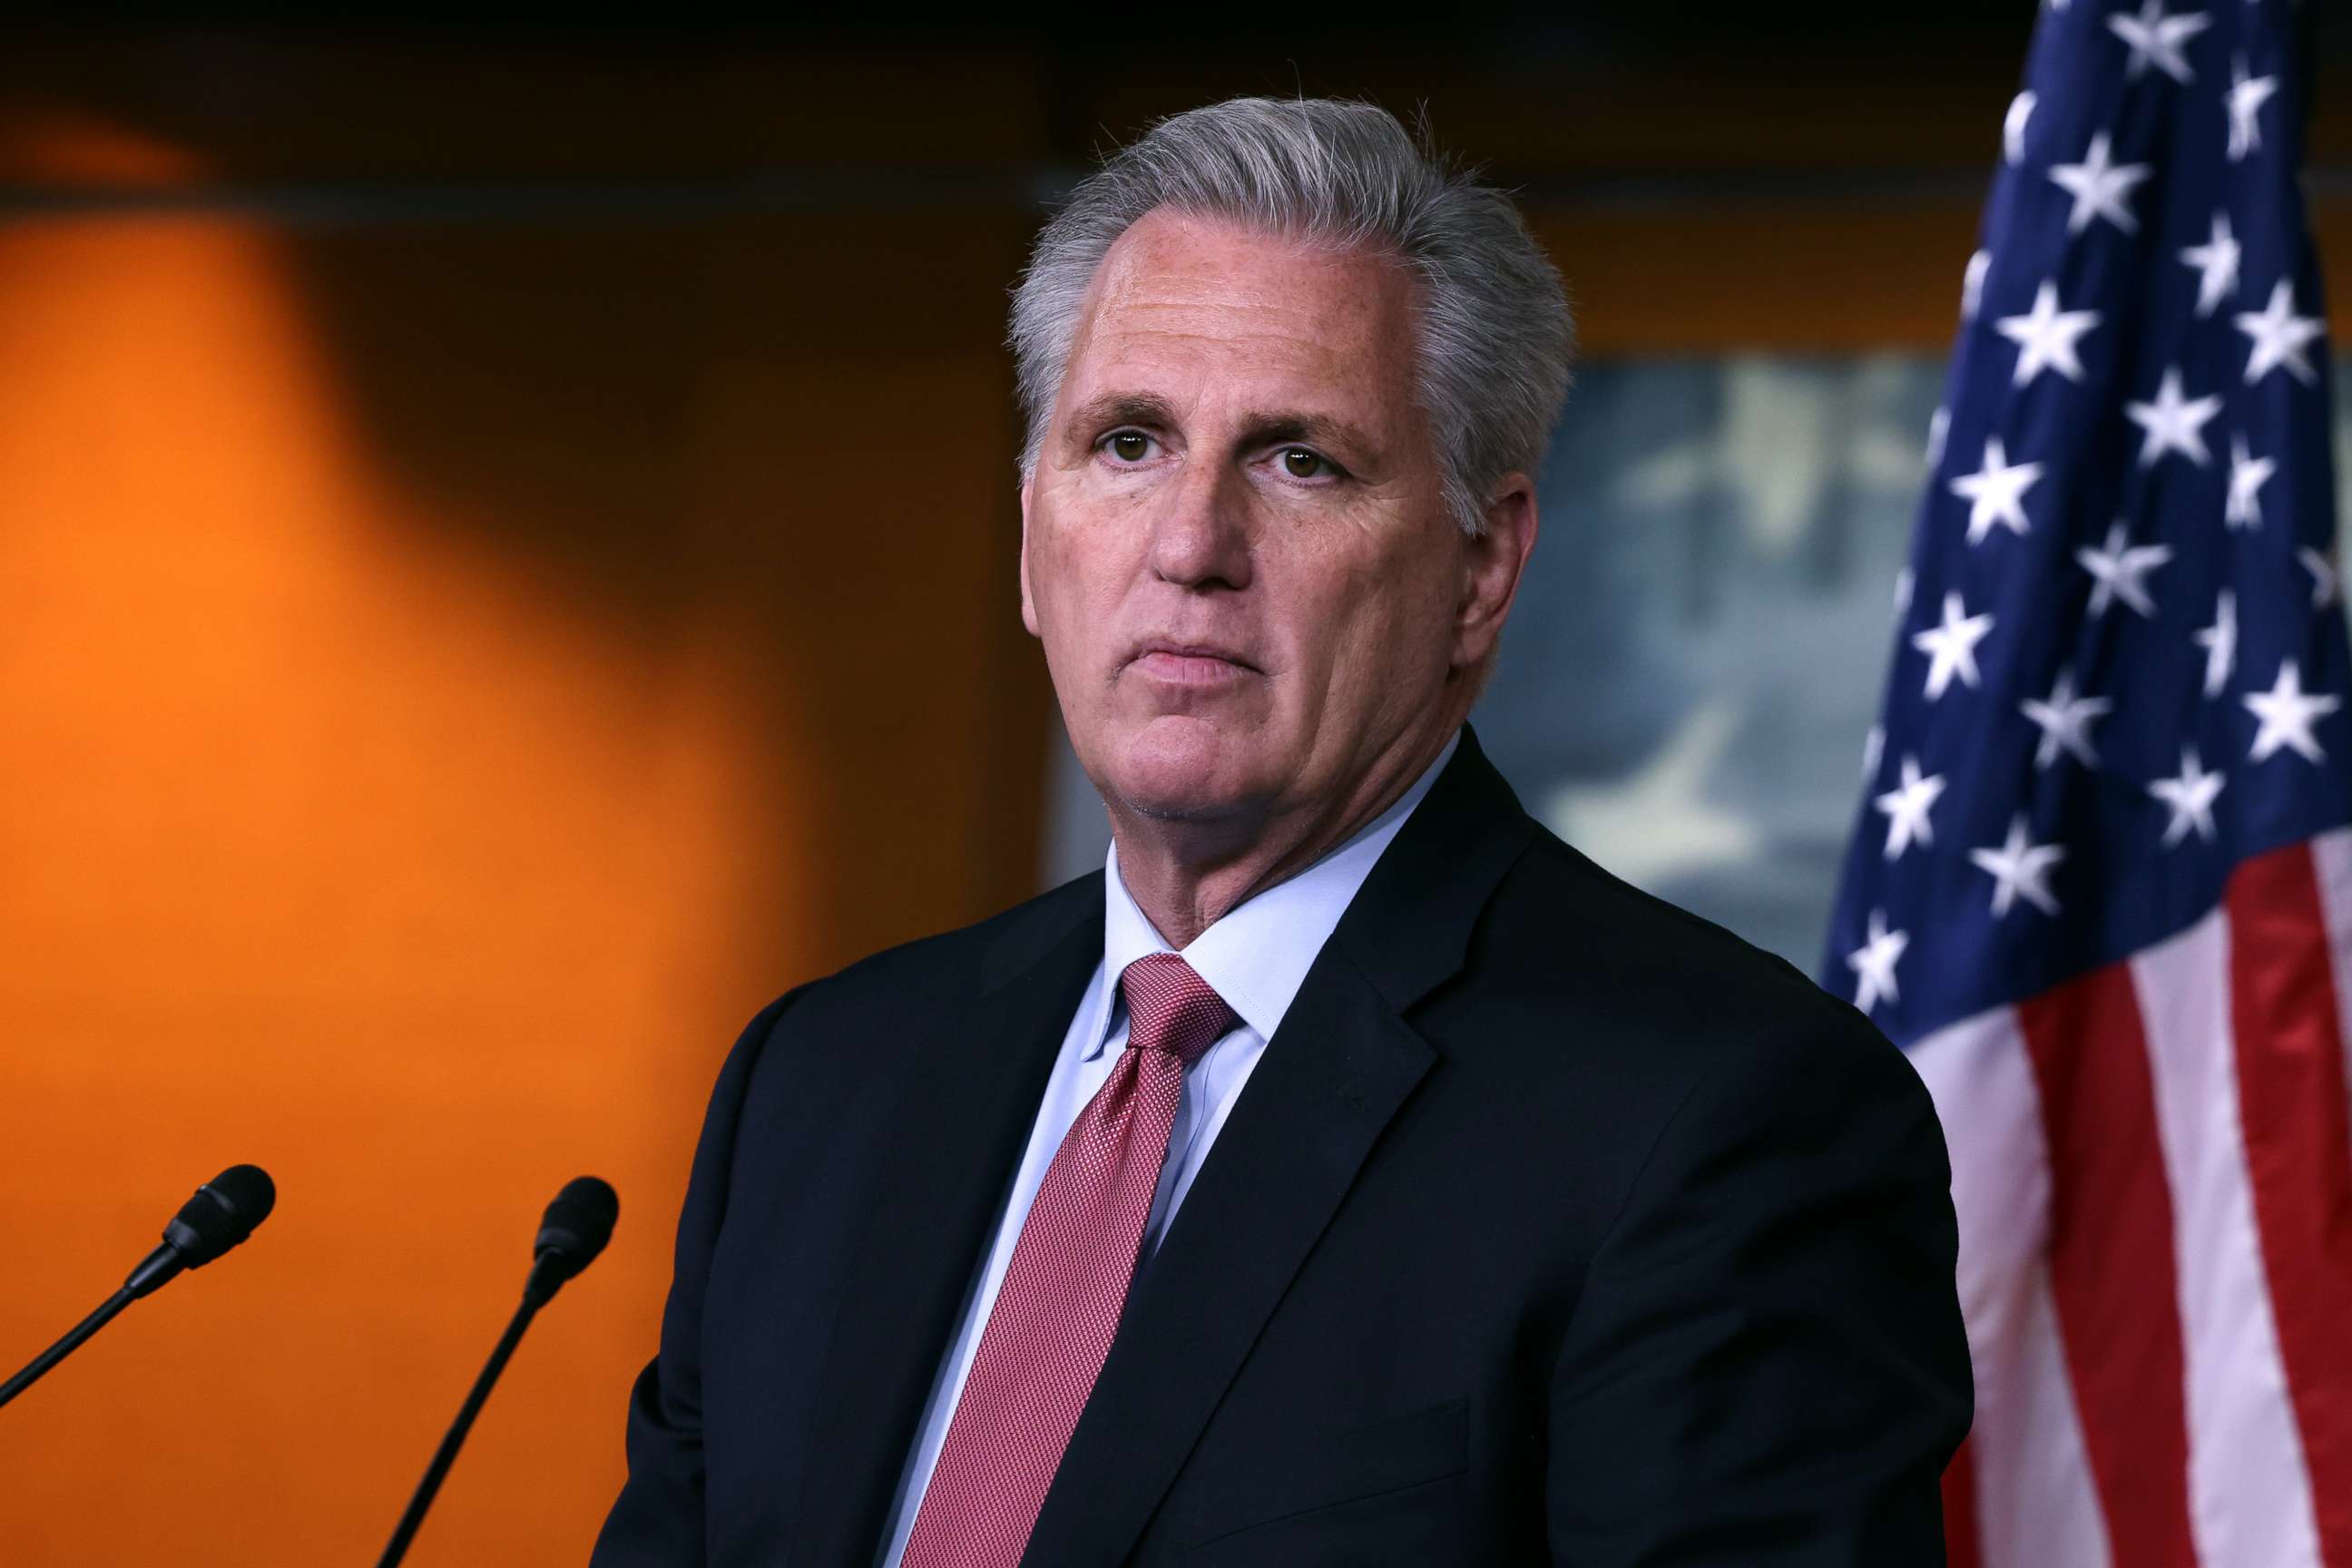 PHOTO: House Minority Leader Kevin McCarthy speaks at his weekly news conference at the Capitol building, July 22, 2021, in Washington, DC.